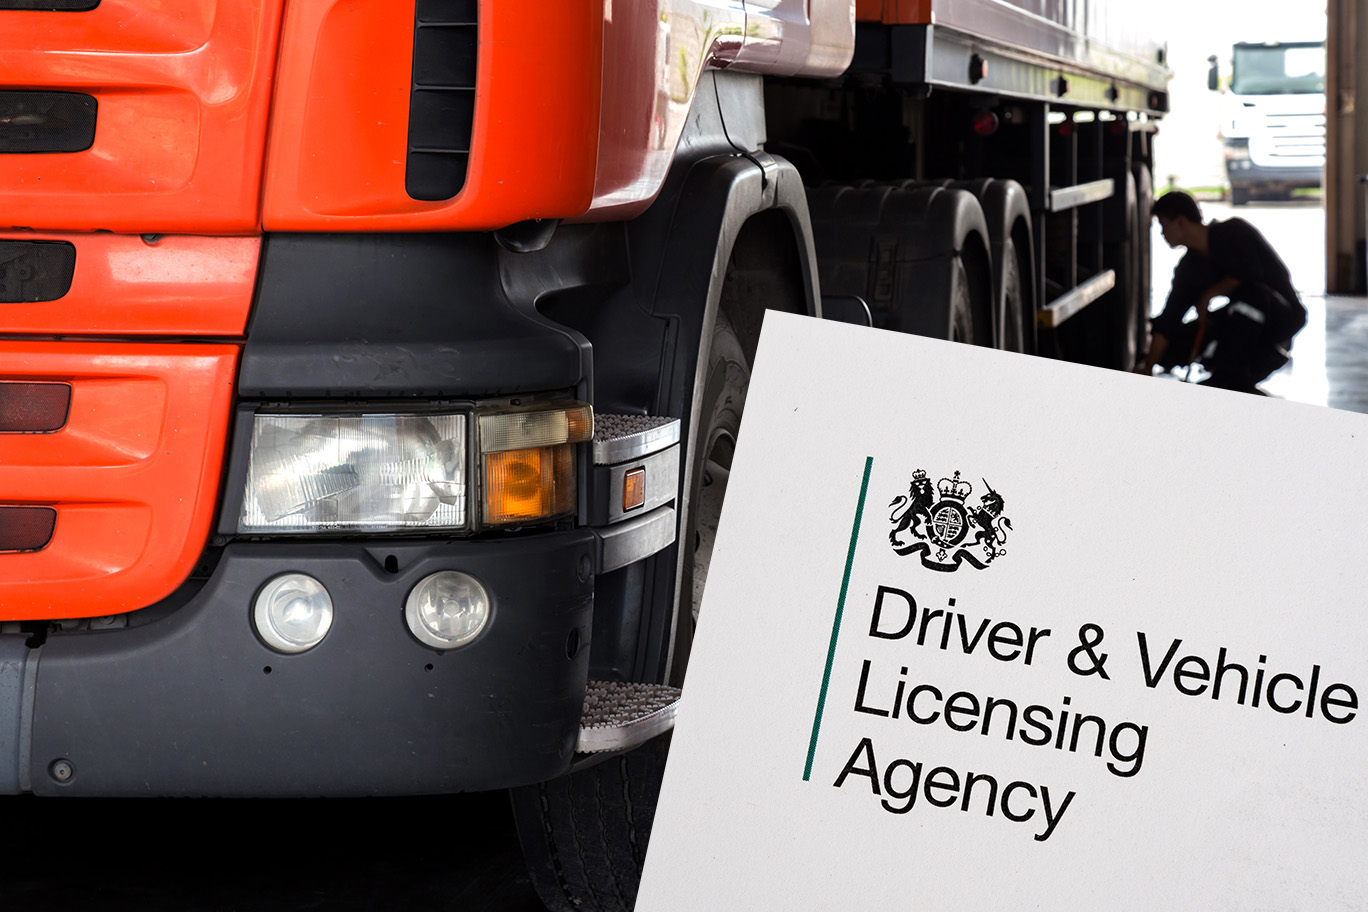 DVSA services – industrial action by the Public and Commercial Services Union confirmed